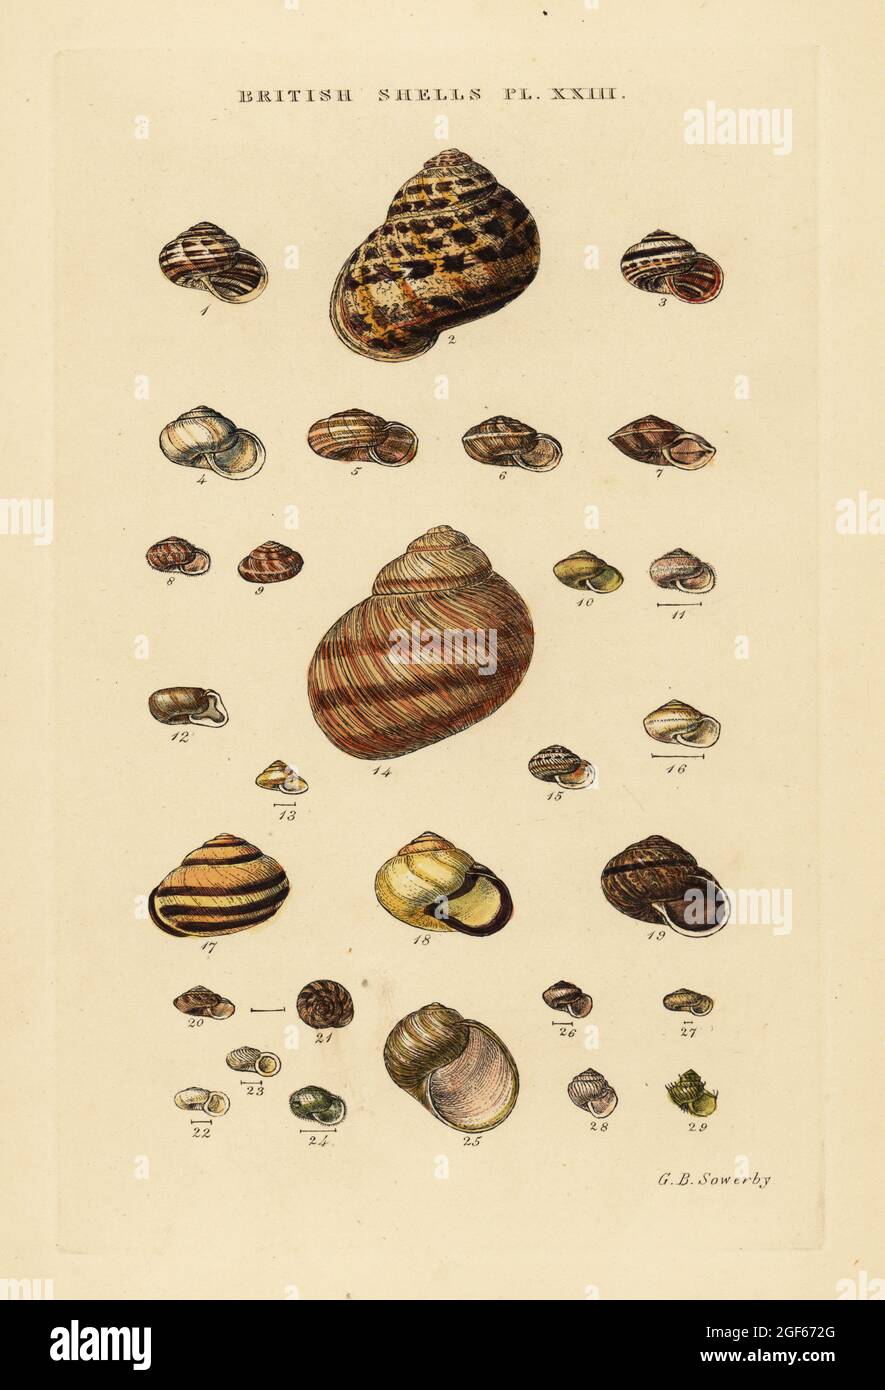 Garden snail, Cornu aspersum, Roman snail, Helix pomatia, etc. Handcoloured copperplate engraving by George Brettingham Sowerby from his own Illustrated Index of British Shells, Sowerby and Simpkin, Marshall & Co., London, 1859. George Brettingham Sowerby II (1812-1884), British naturalist, illustrator, and conchologist. Stock Photo